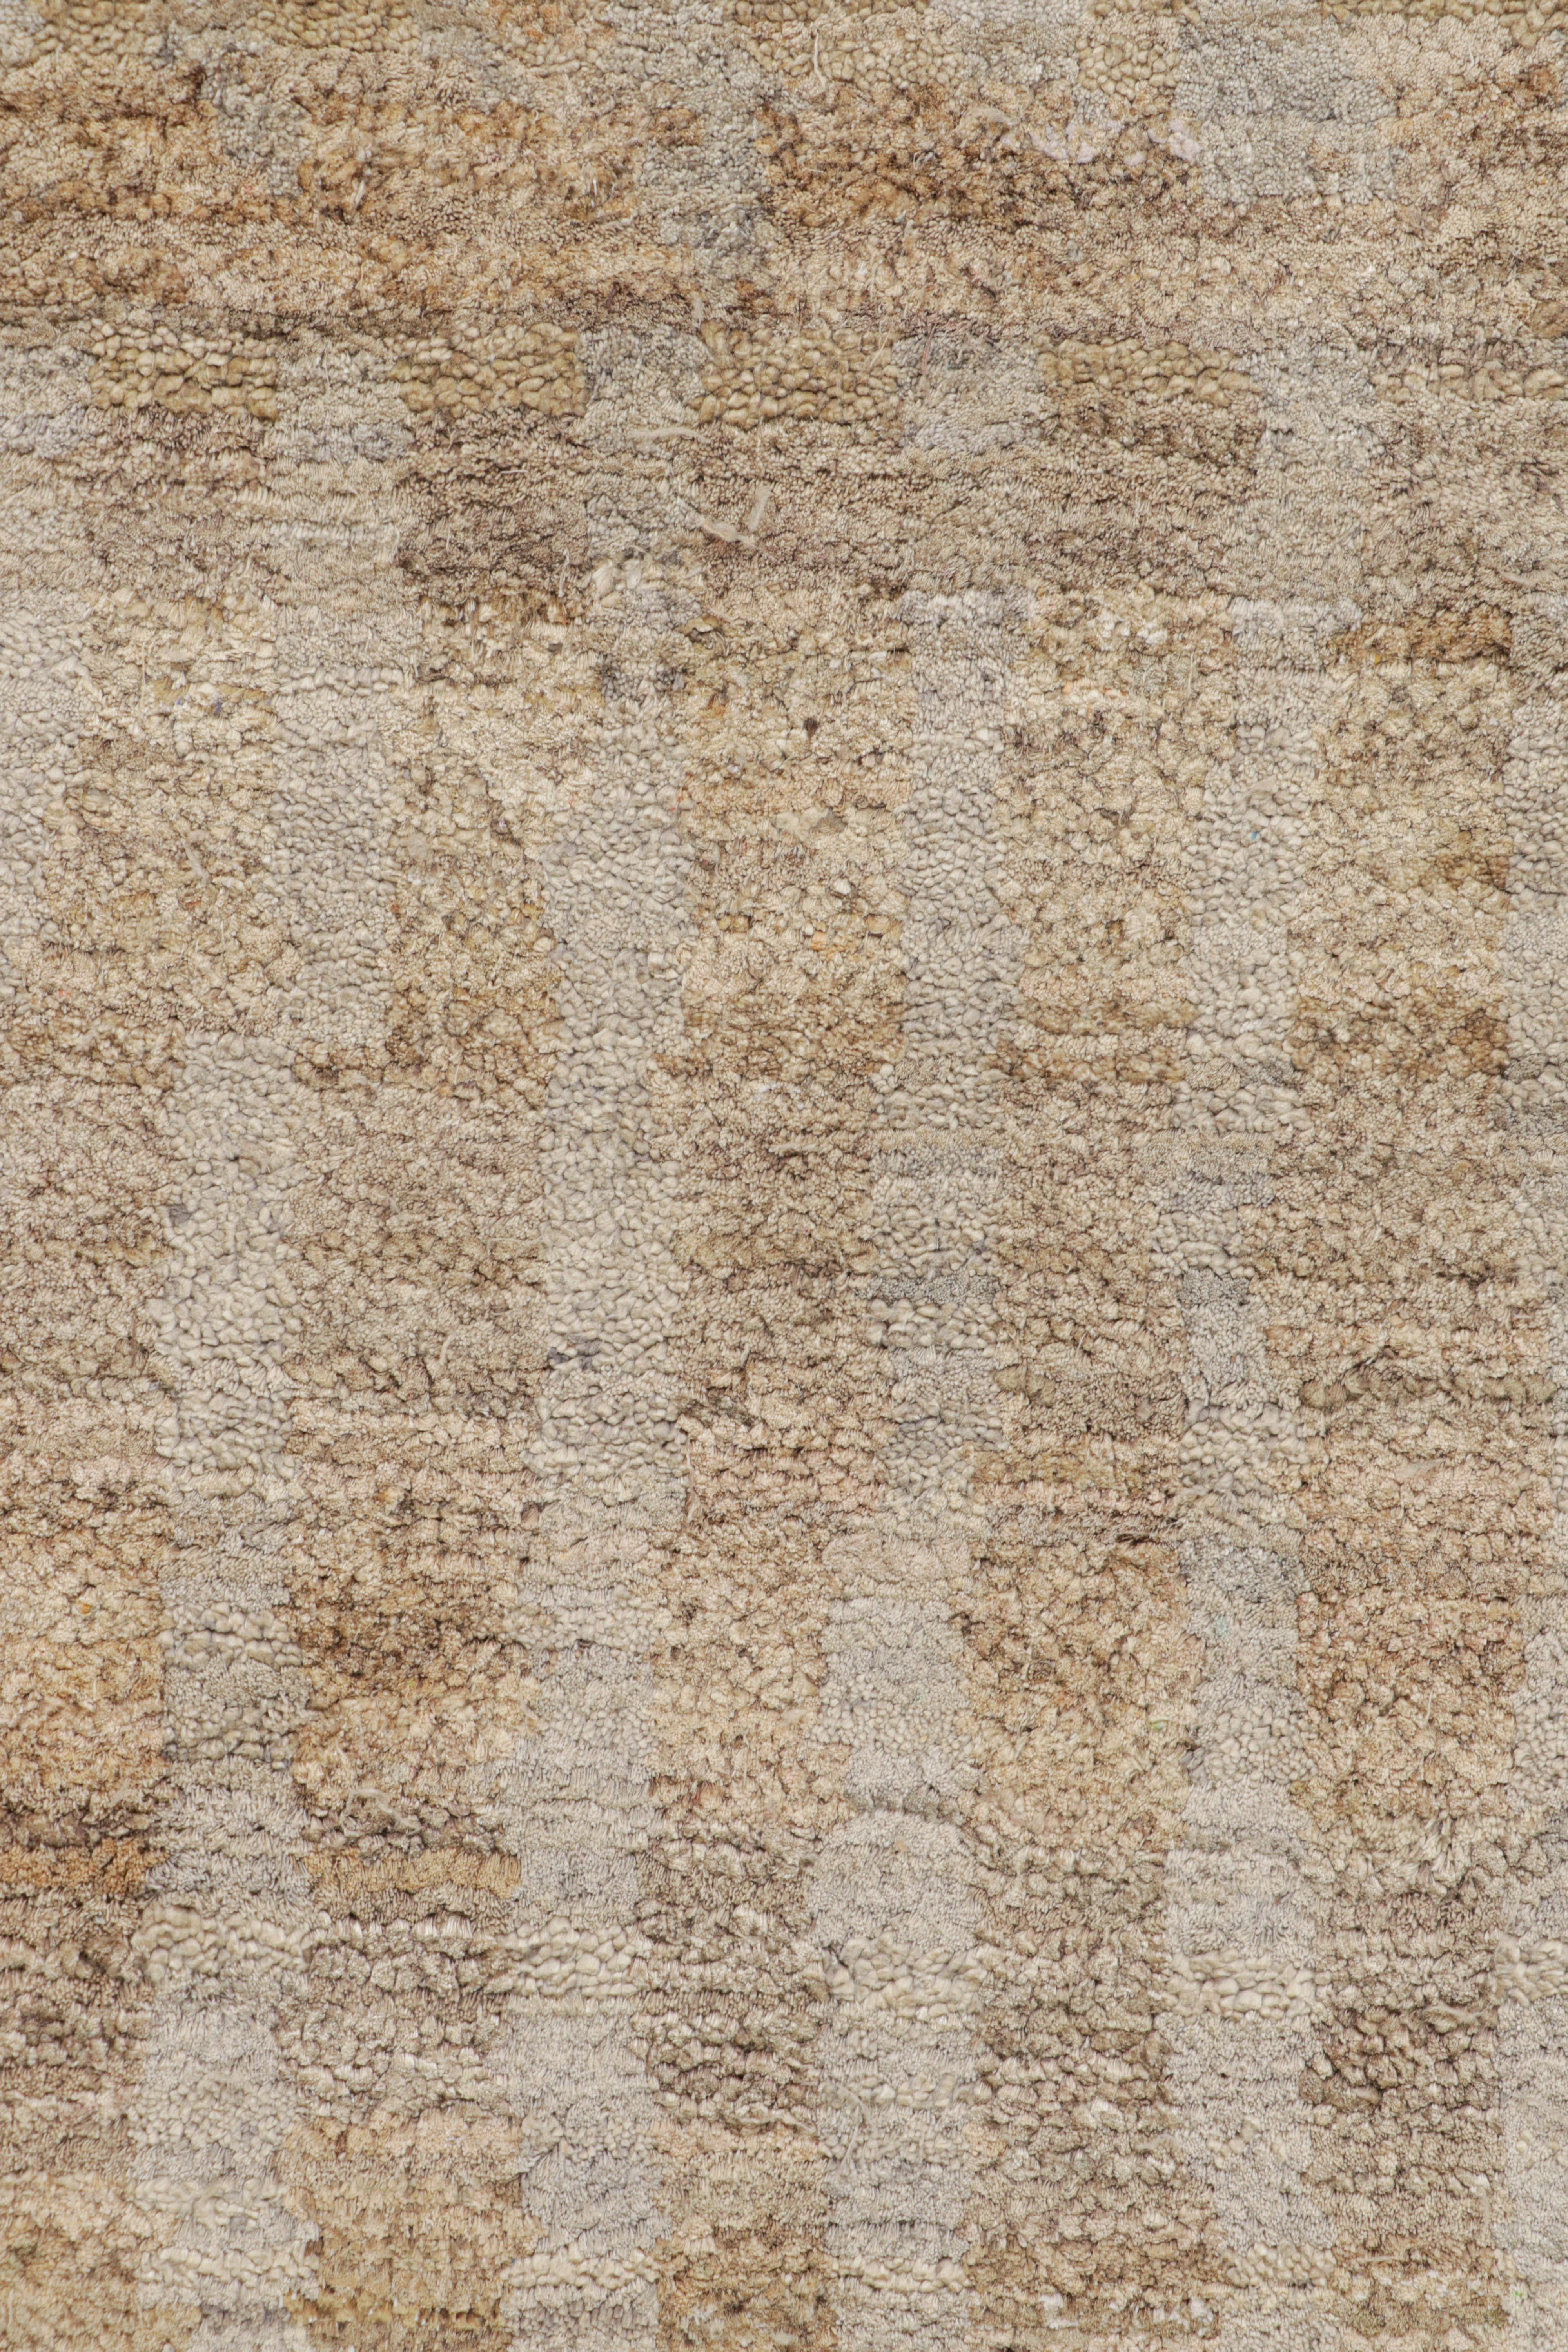 Modern Rug & Kilim’s Contemporary Textural Rug in Beige-Brown and Gray Tones For Sale